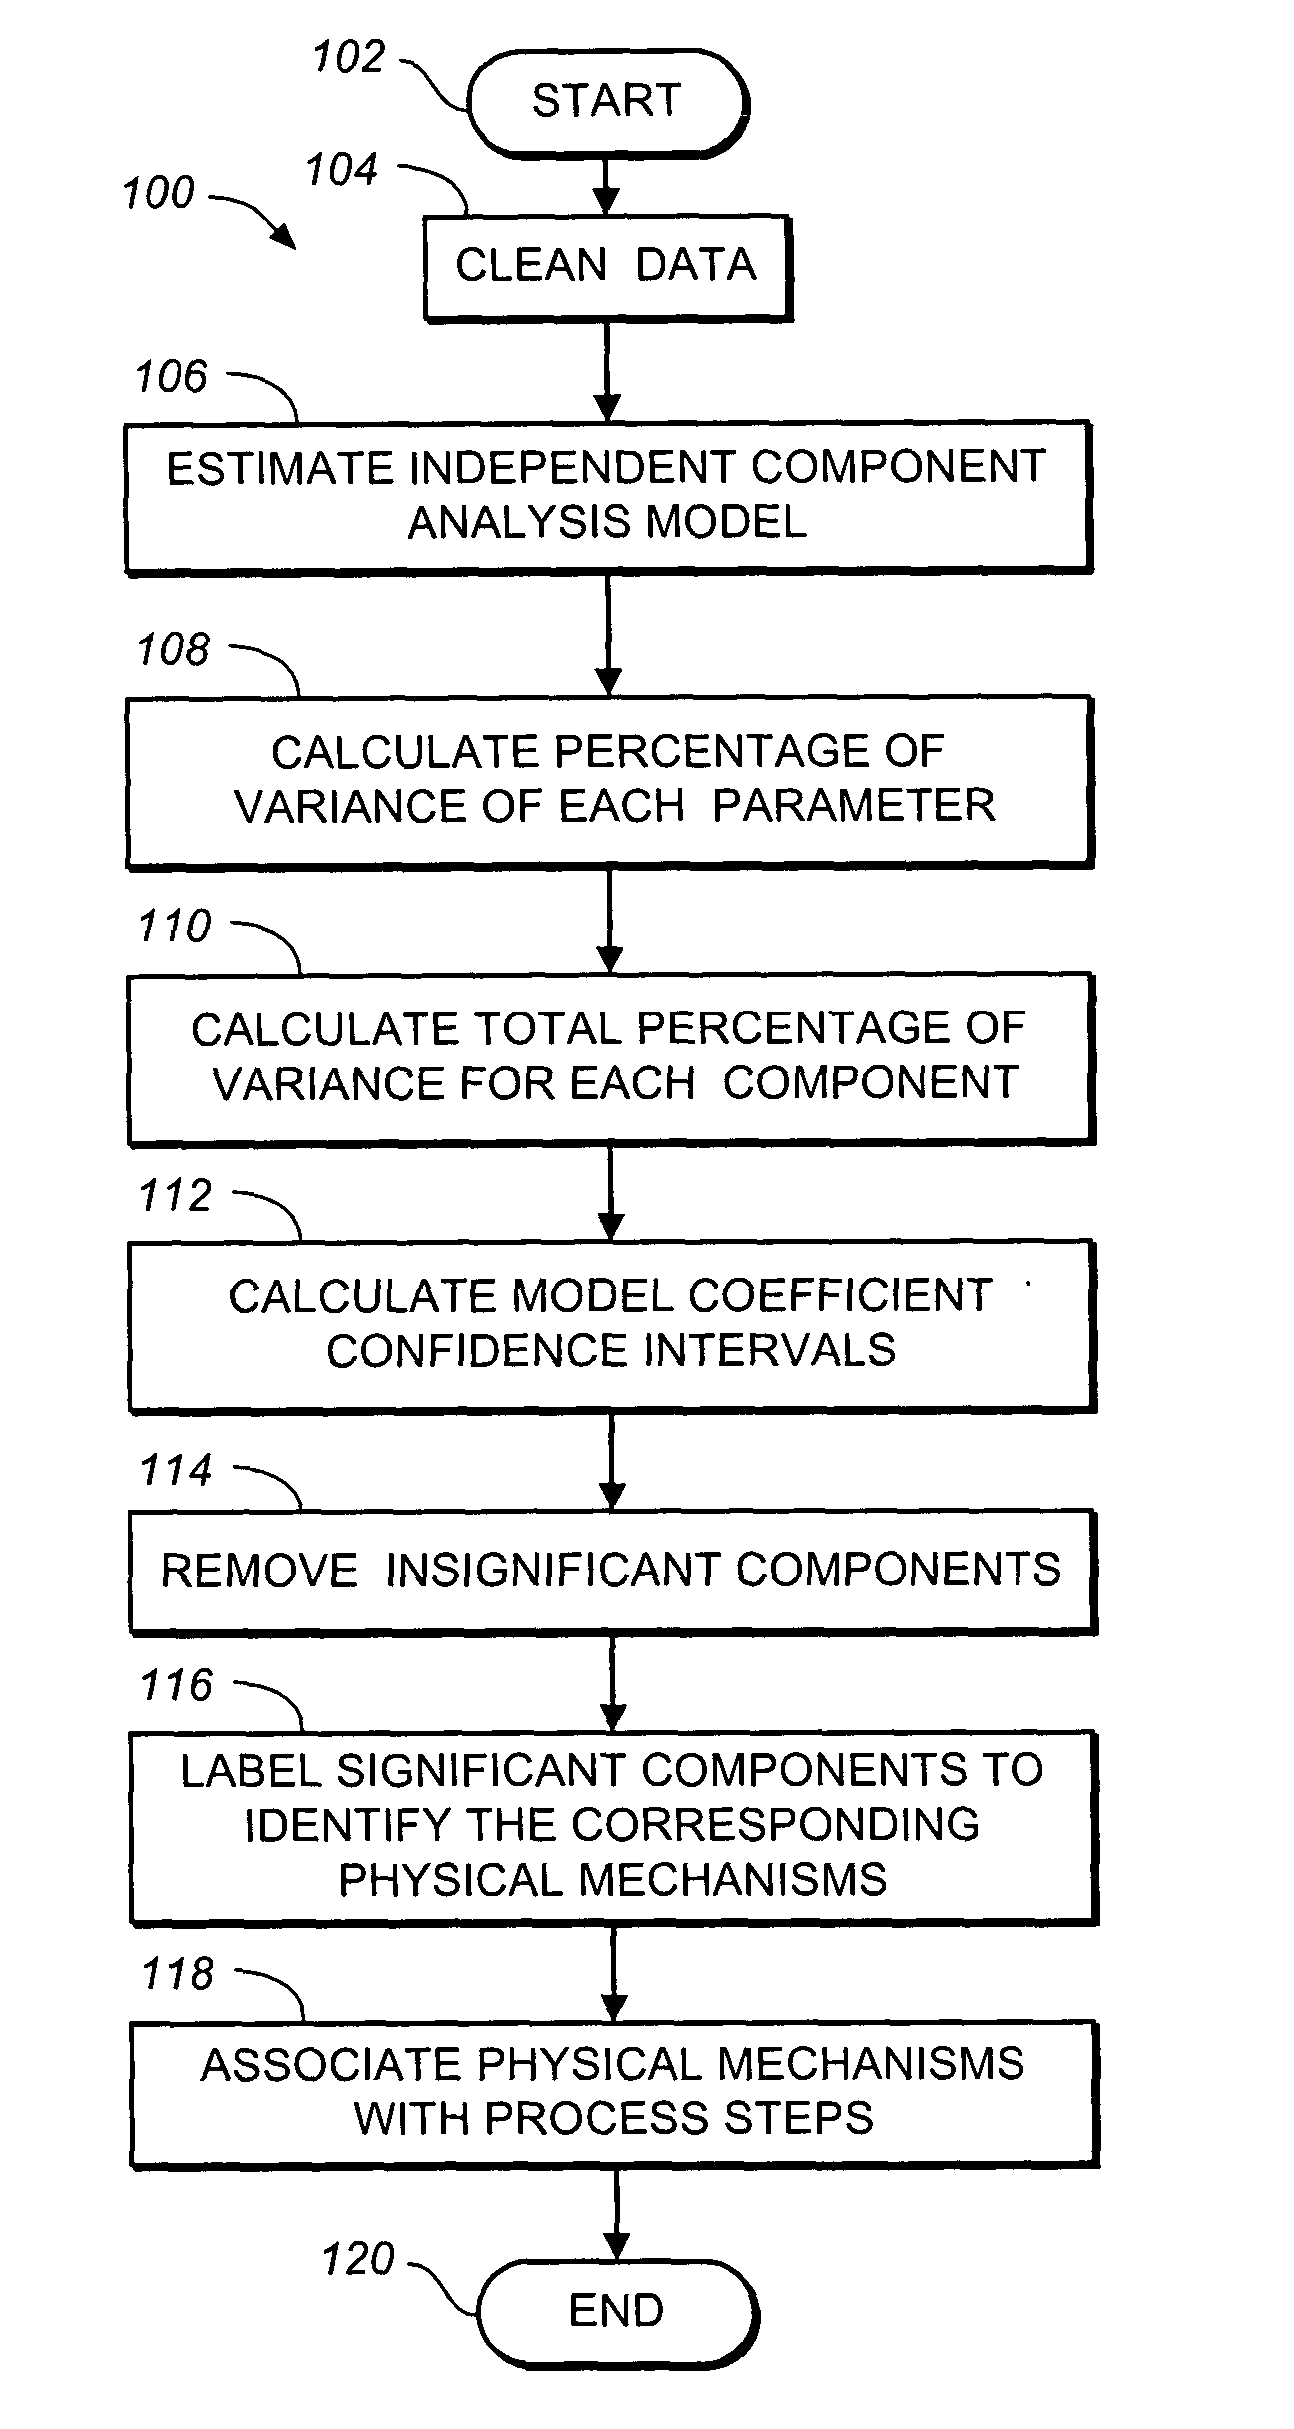 Method of isolating sources of variance in parametric data